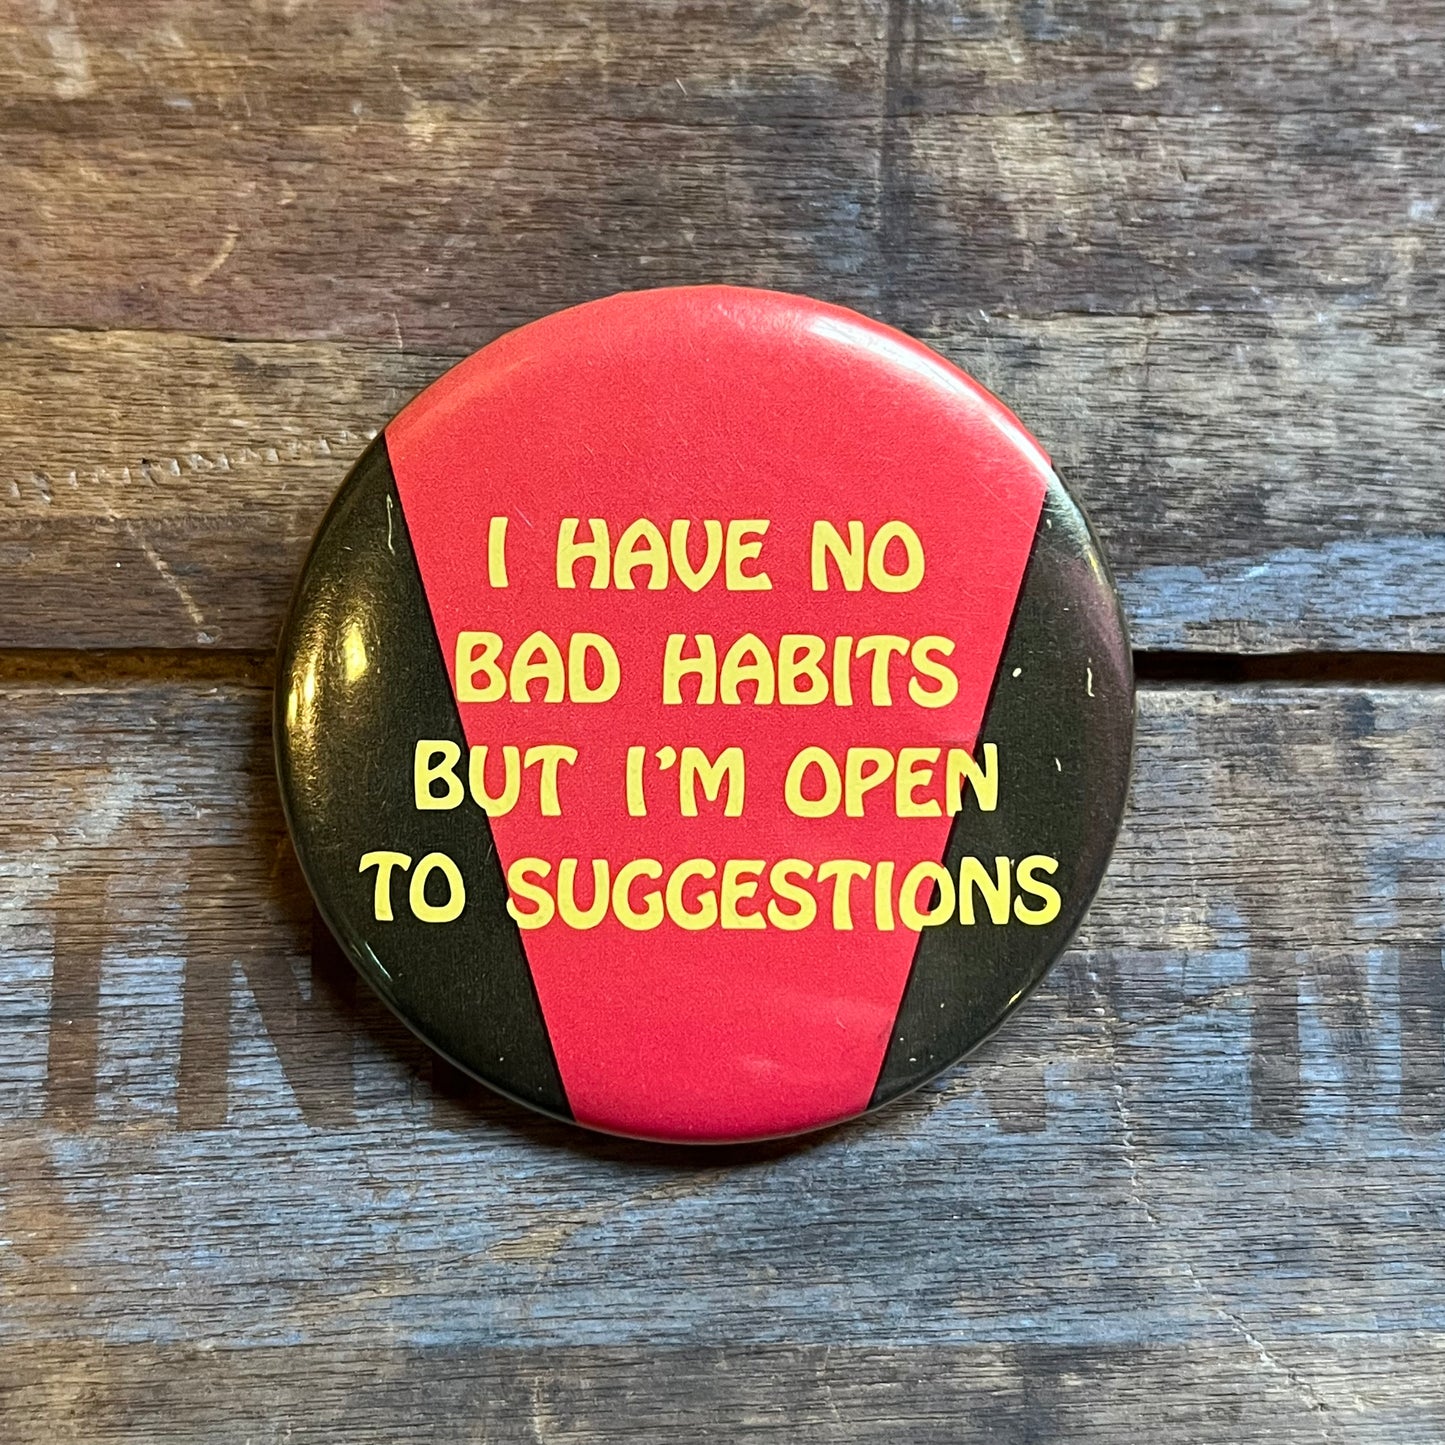 【USA vintage】缶バッジ　I HAVE NO BAD HABITS BUT I’M OPEN TO SUGGESTIONS